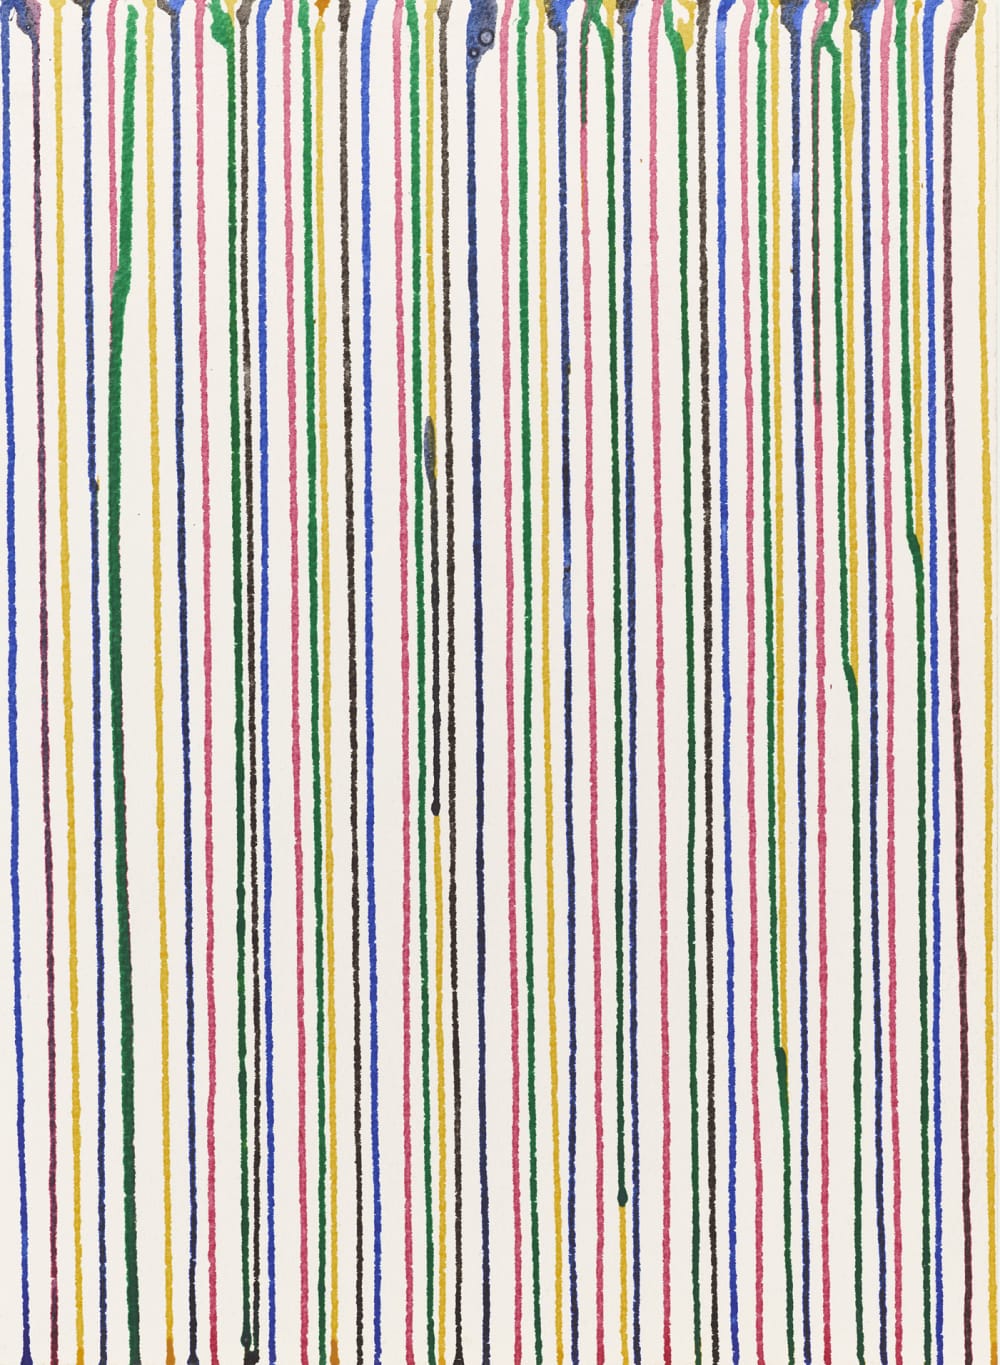 Poured Lines: Mixed Coloured Inks, 2004